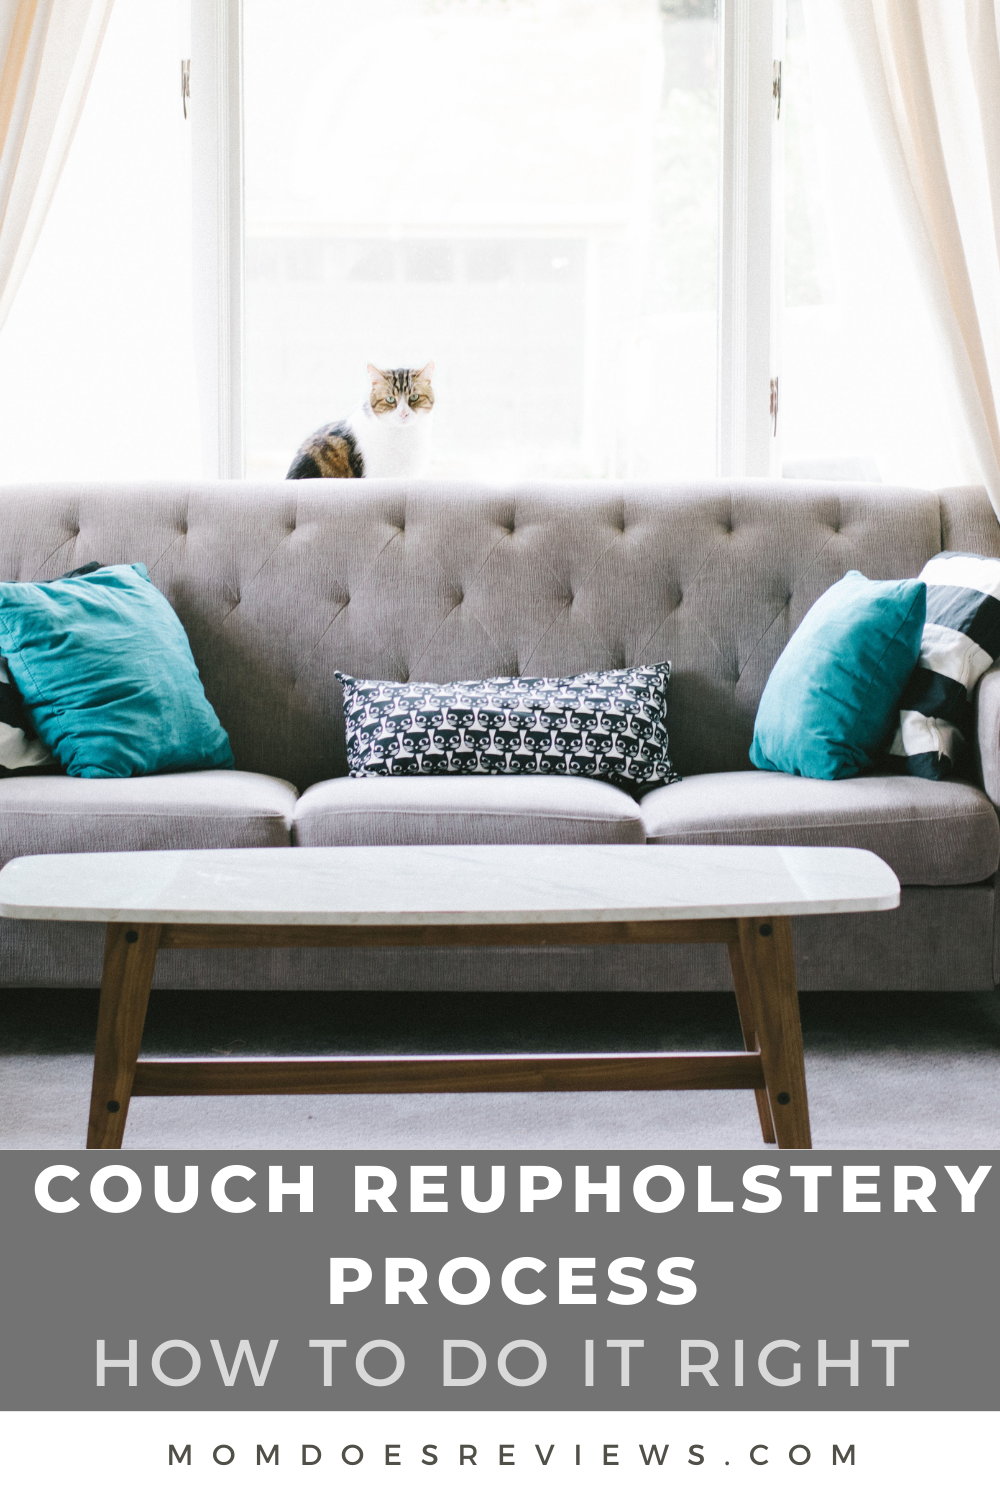 Couch Reupholstery Process